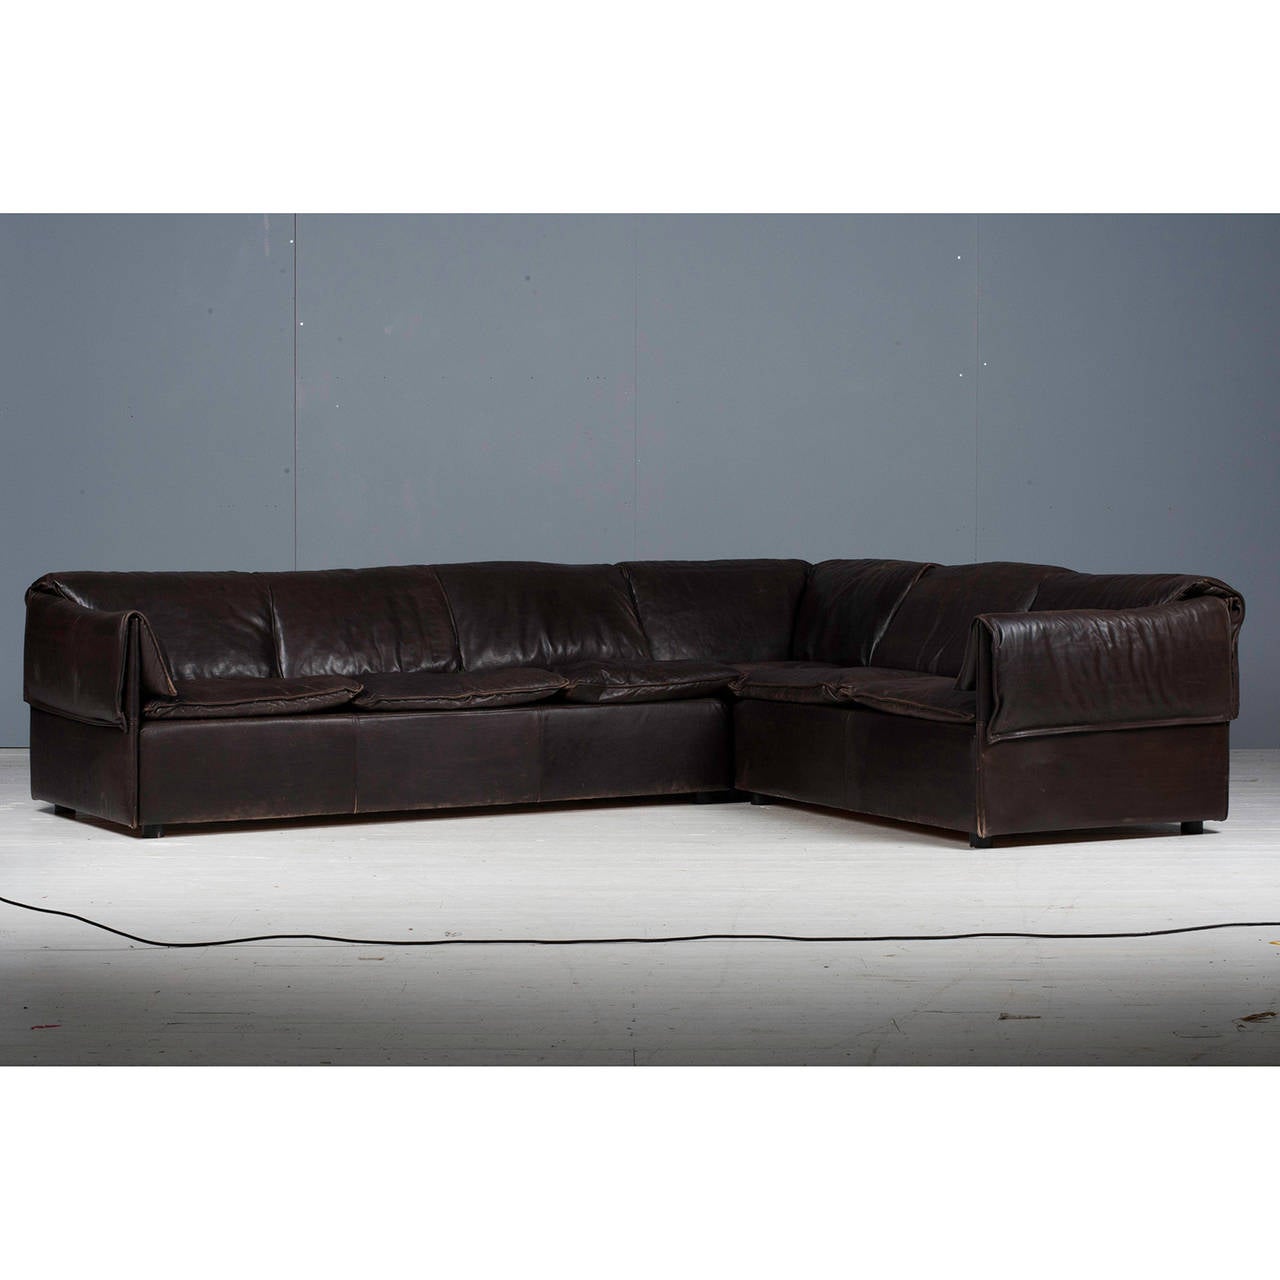 Amazing corner sofa, 'Lotus' model, manufactured by Niels Eilersen, Denmark. Everyone can lounge on this 6 module sofa. Super thick buffalo leather upholstery in excellent condition. One of the most comfortable sofas we have ever sat on! A great